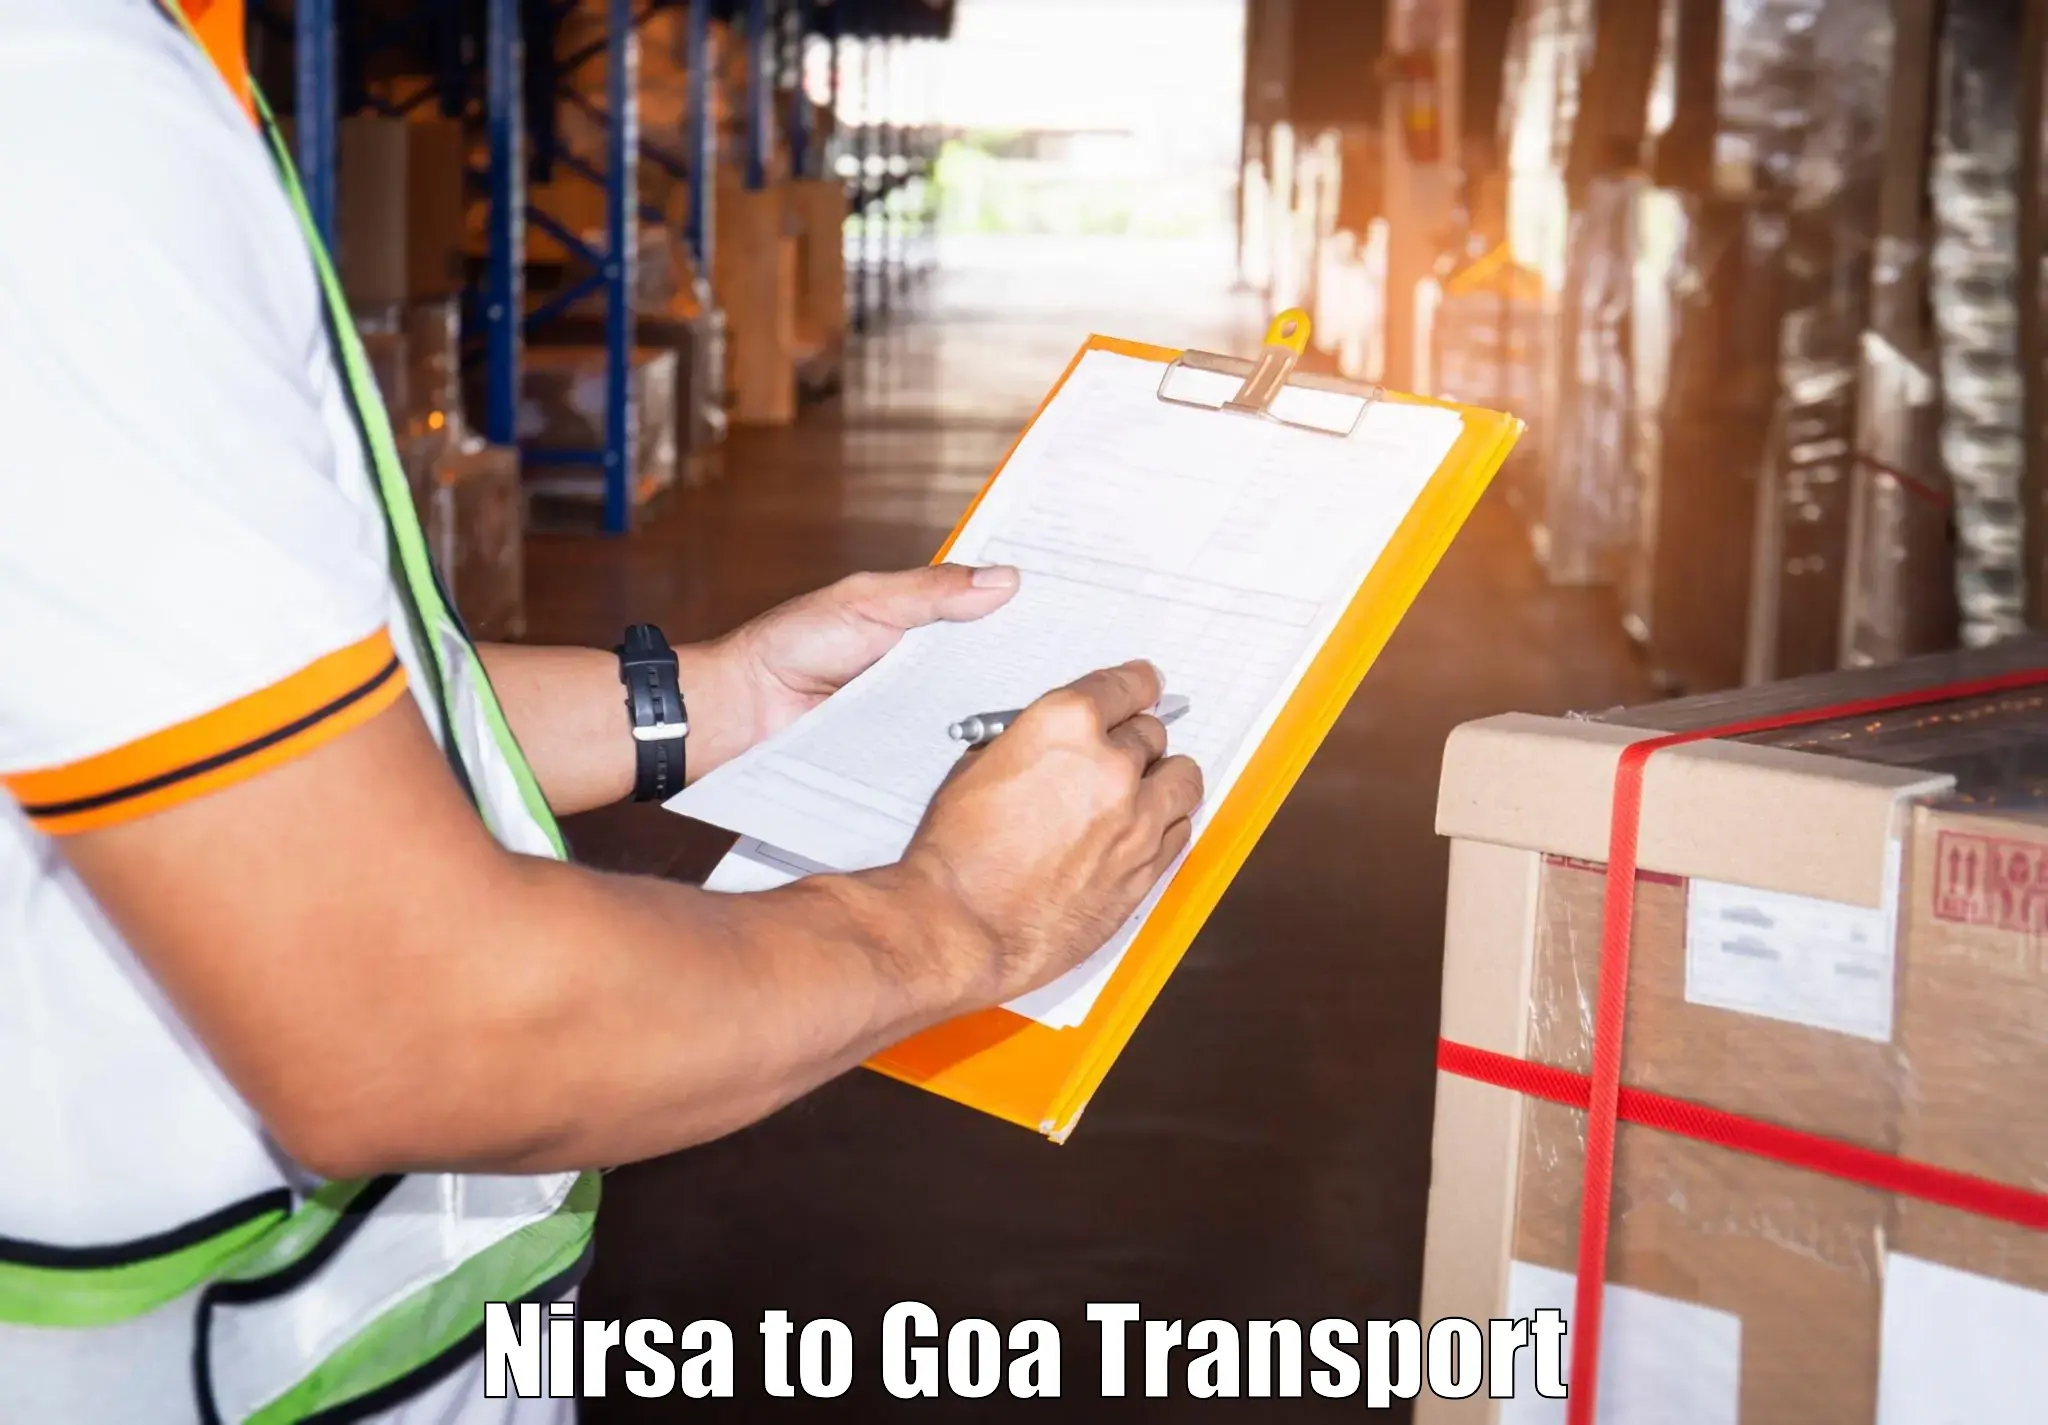 Container transport service Nirsa to Goa